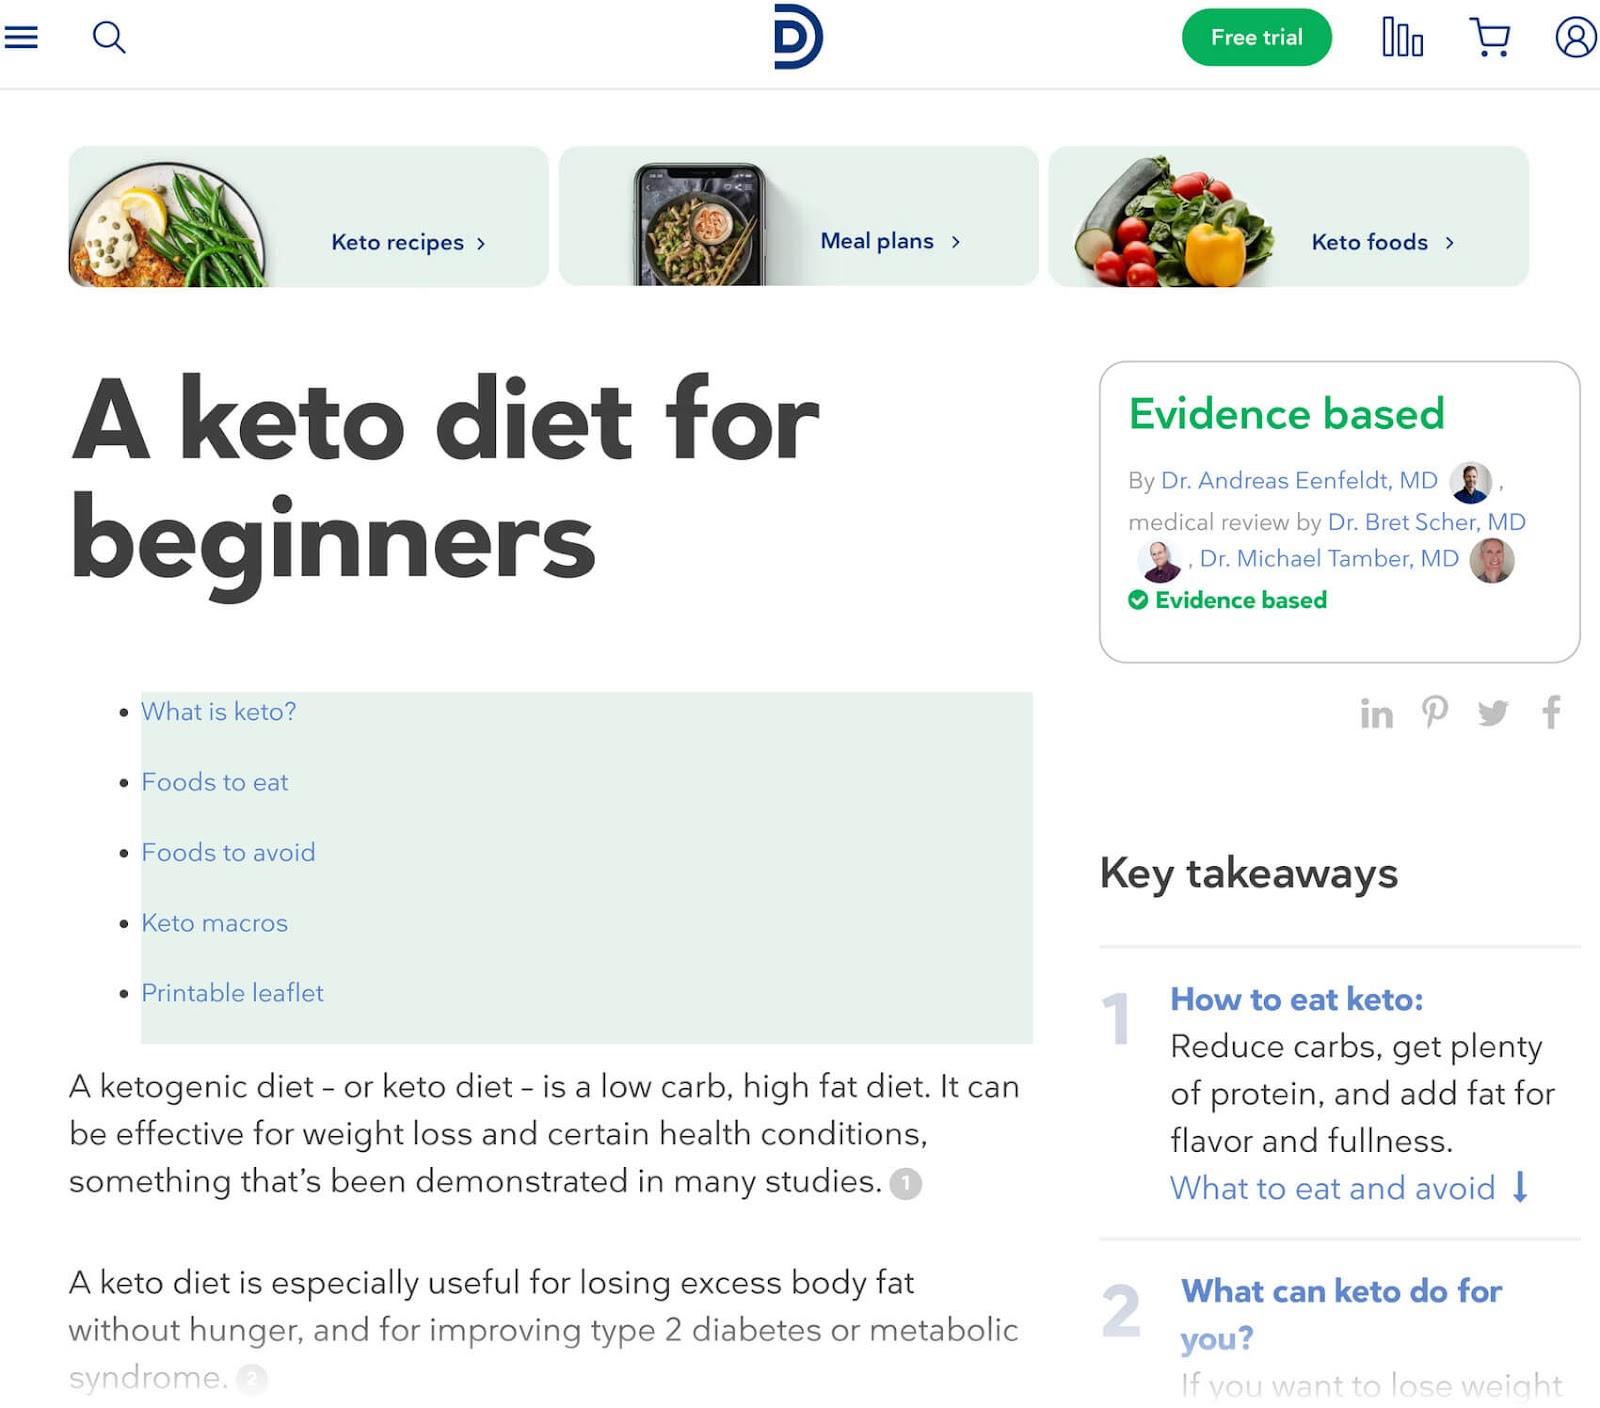 Web guide for "A keto diet for beginners," with navigation options to subtopics like "Keto recipes" and "Meal plans."